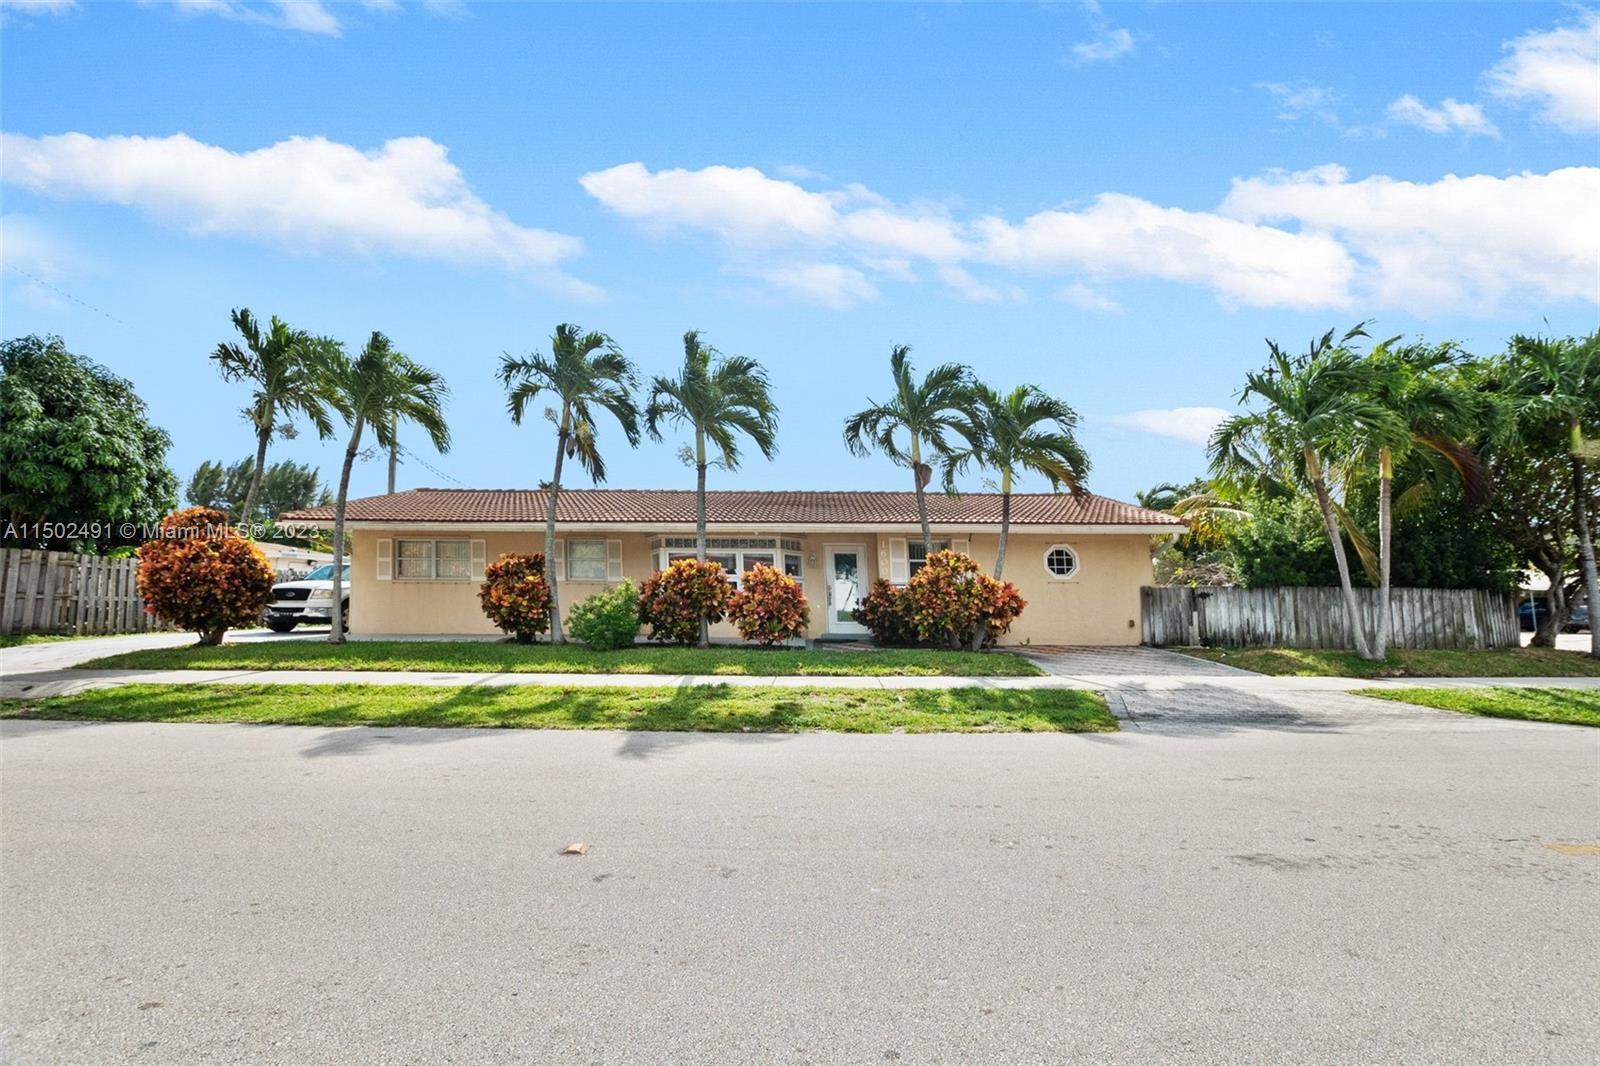 Beuritfully updated, large florida room, plenty of parking available. Close to major attractions, Ki